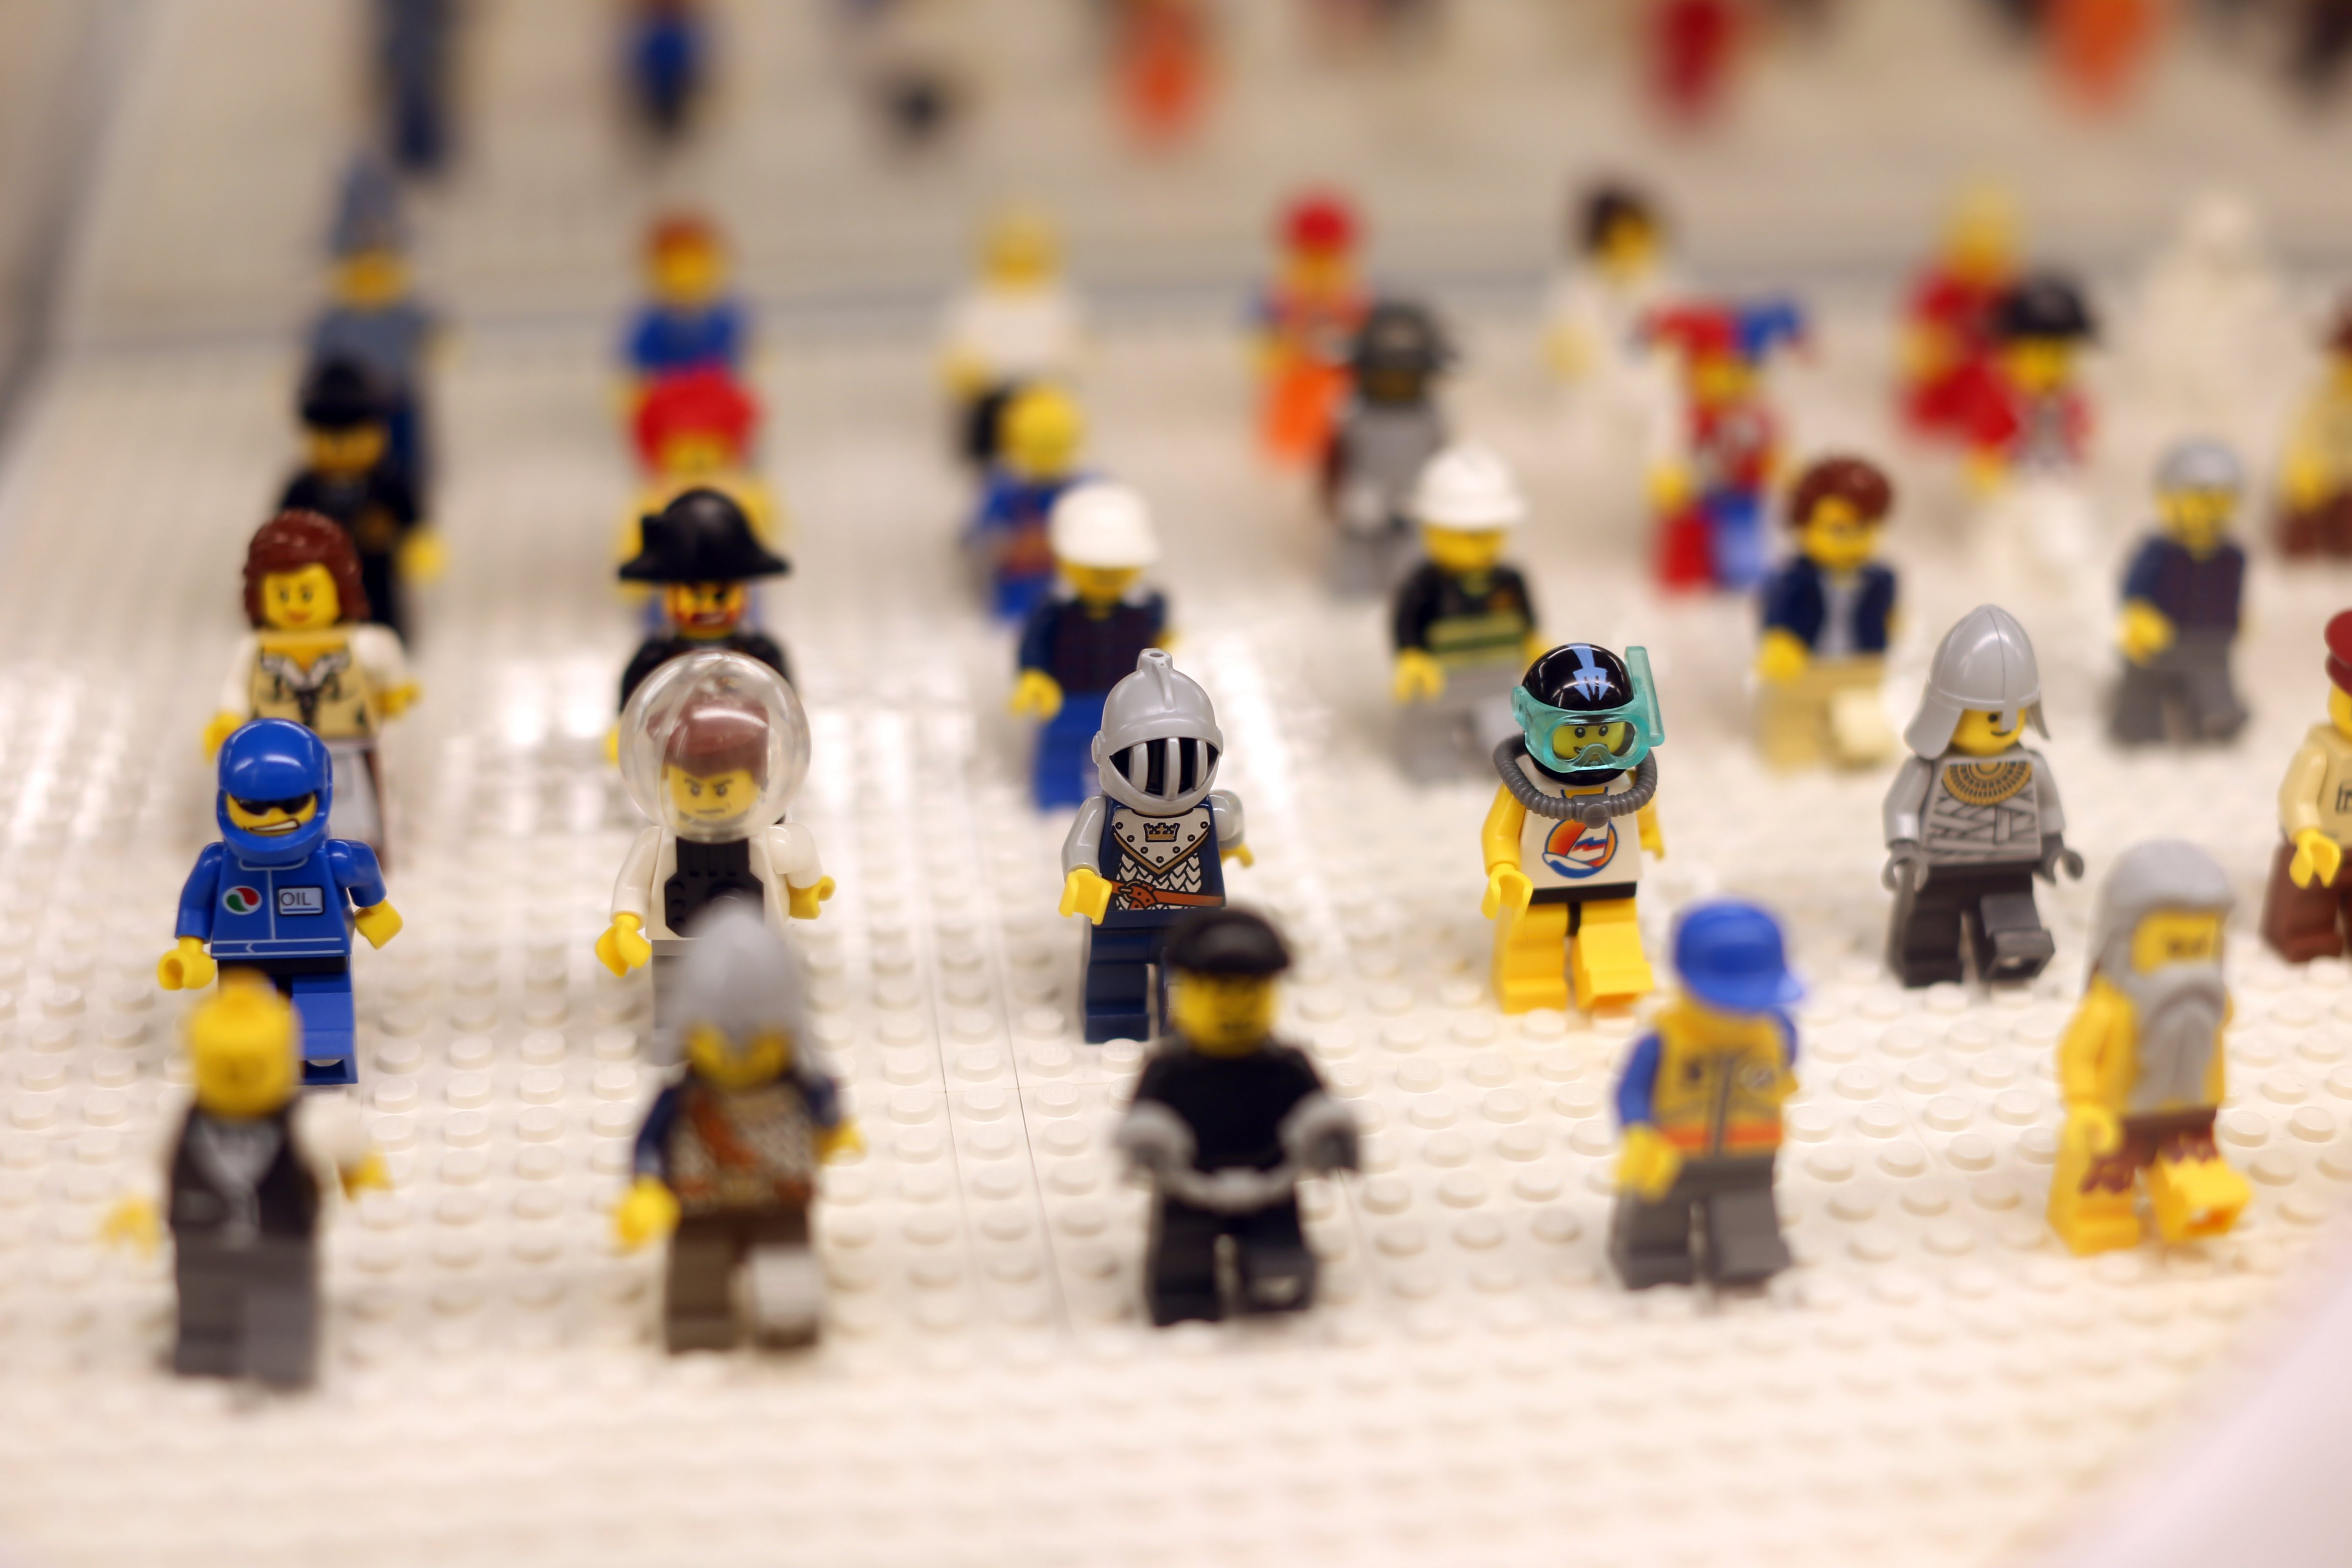 Lego minifigures are displayed in a shop in Levallois-Perret, west of Paris, 2012. (Thomas Samson—AFP/Getty Images)